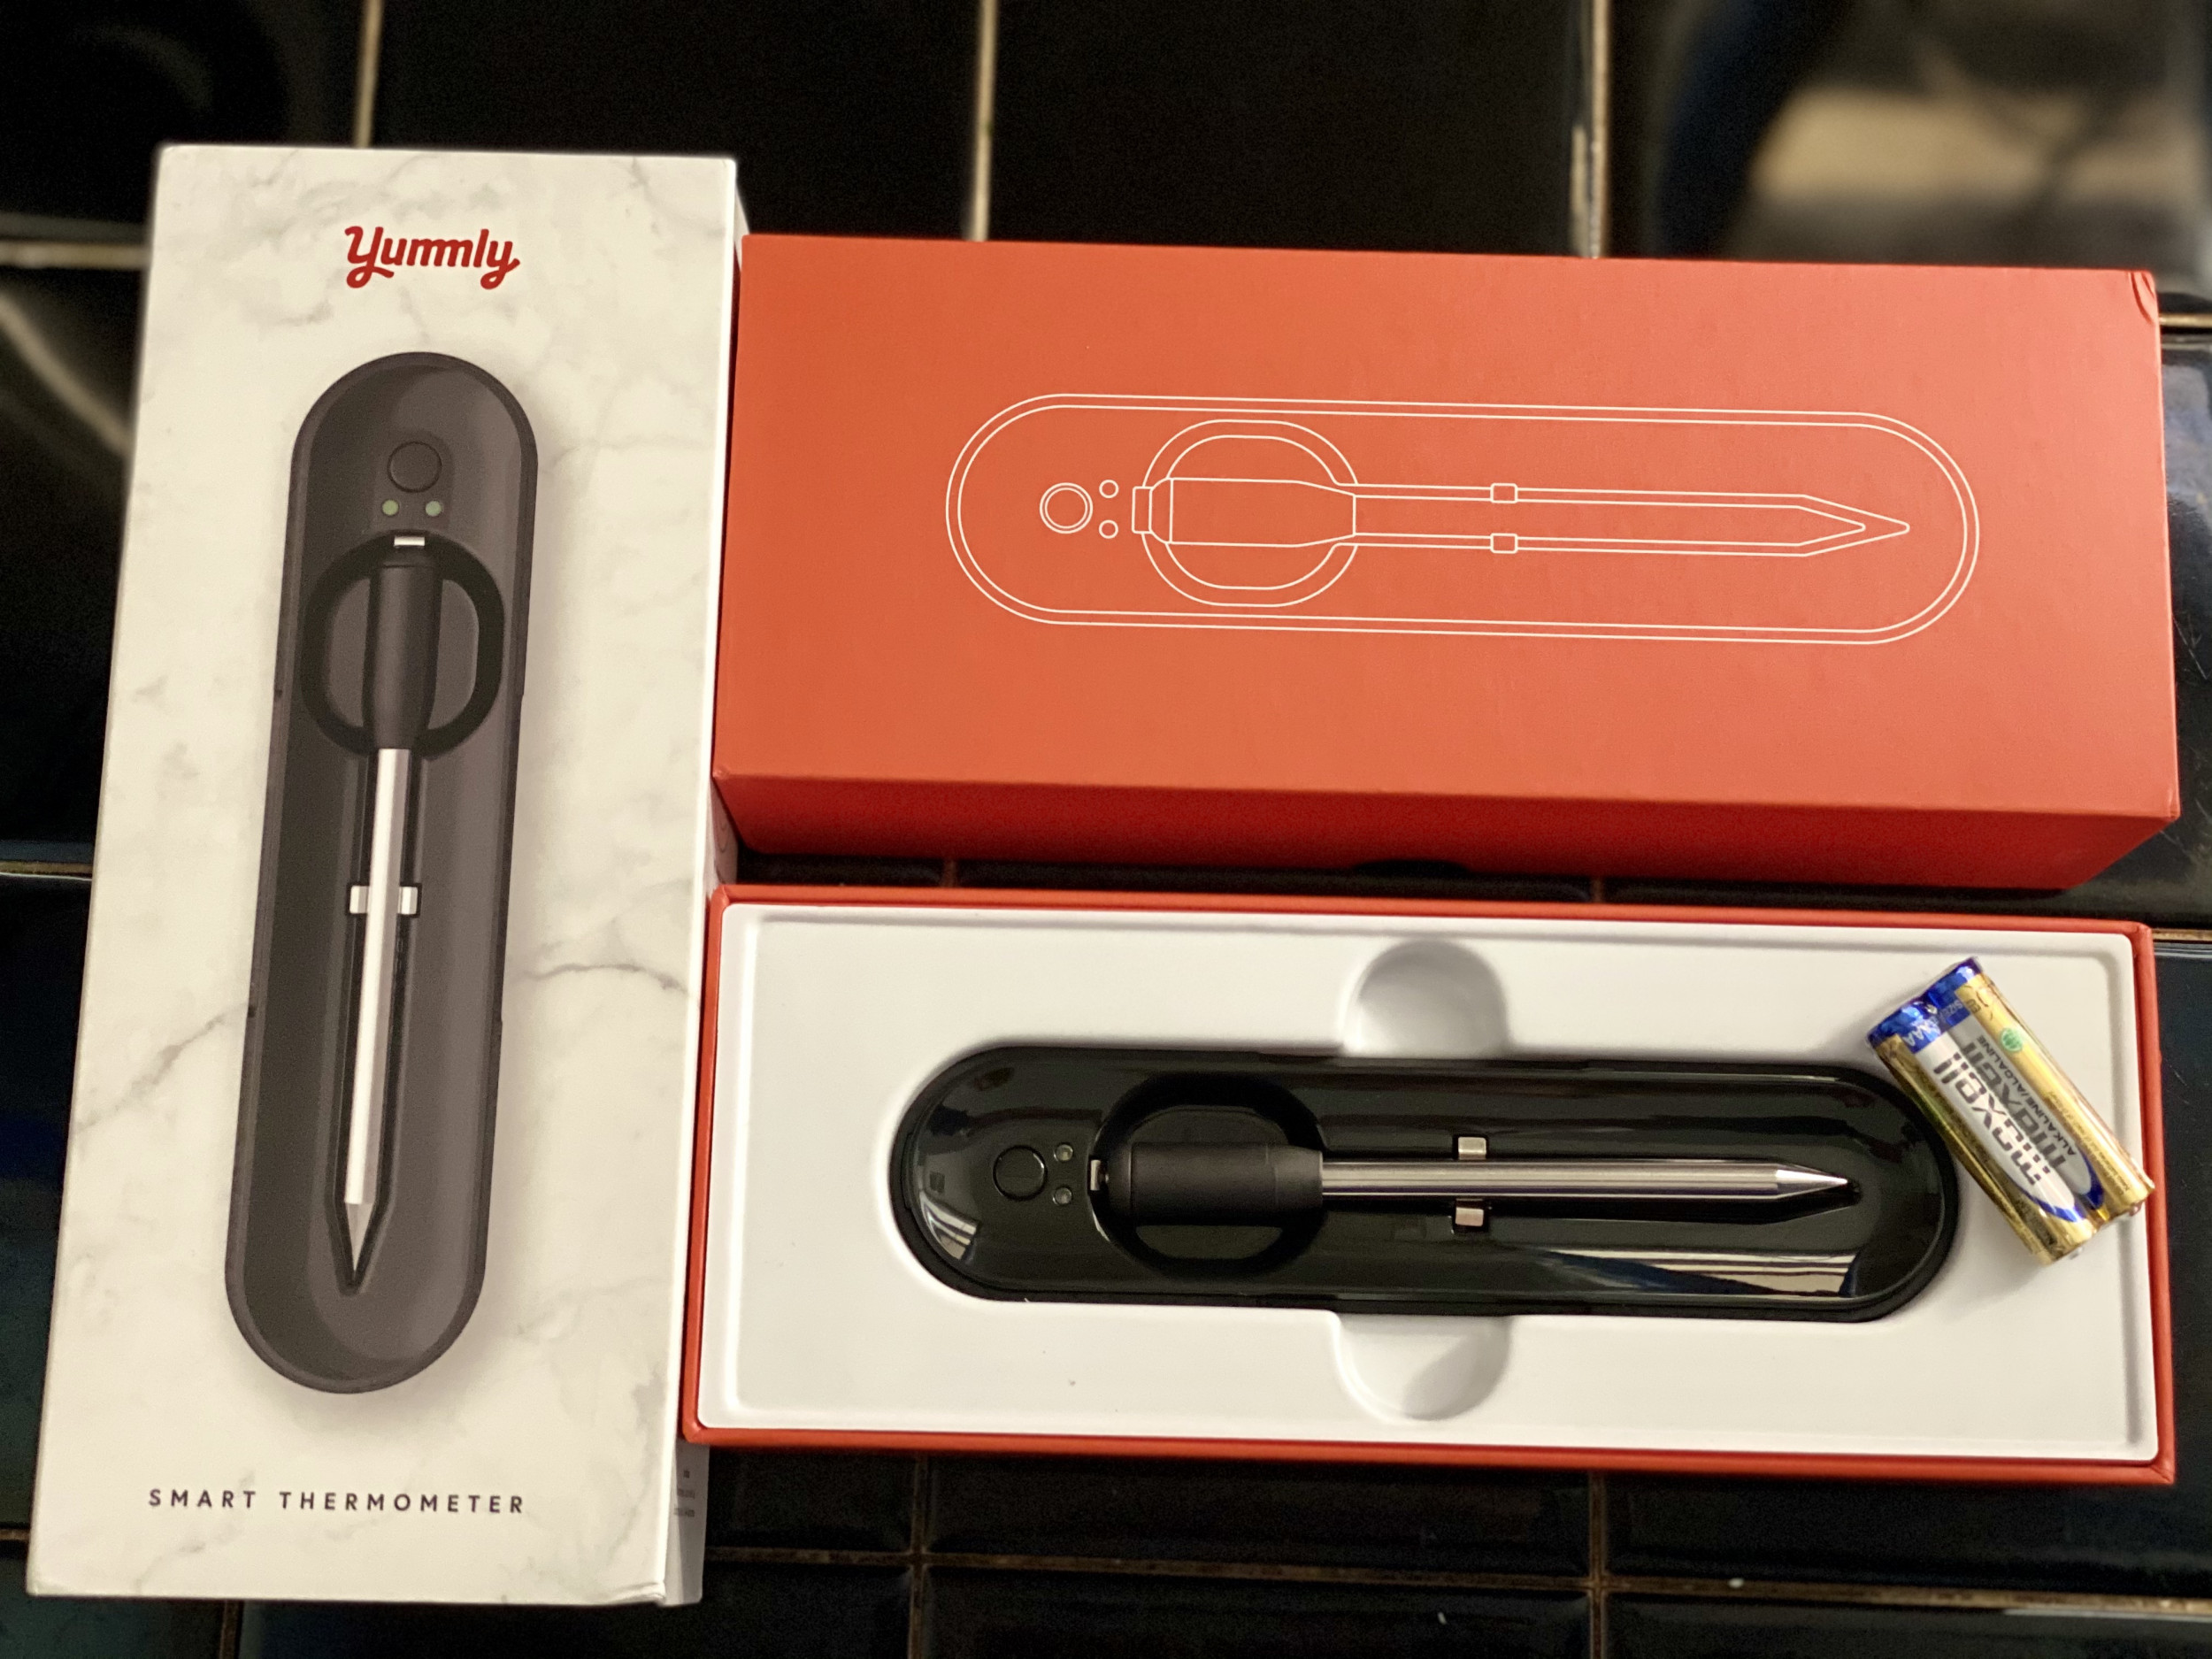 Yummly Smart Thermometer  Take the guesswork out of cooking